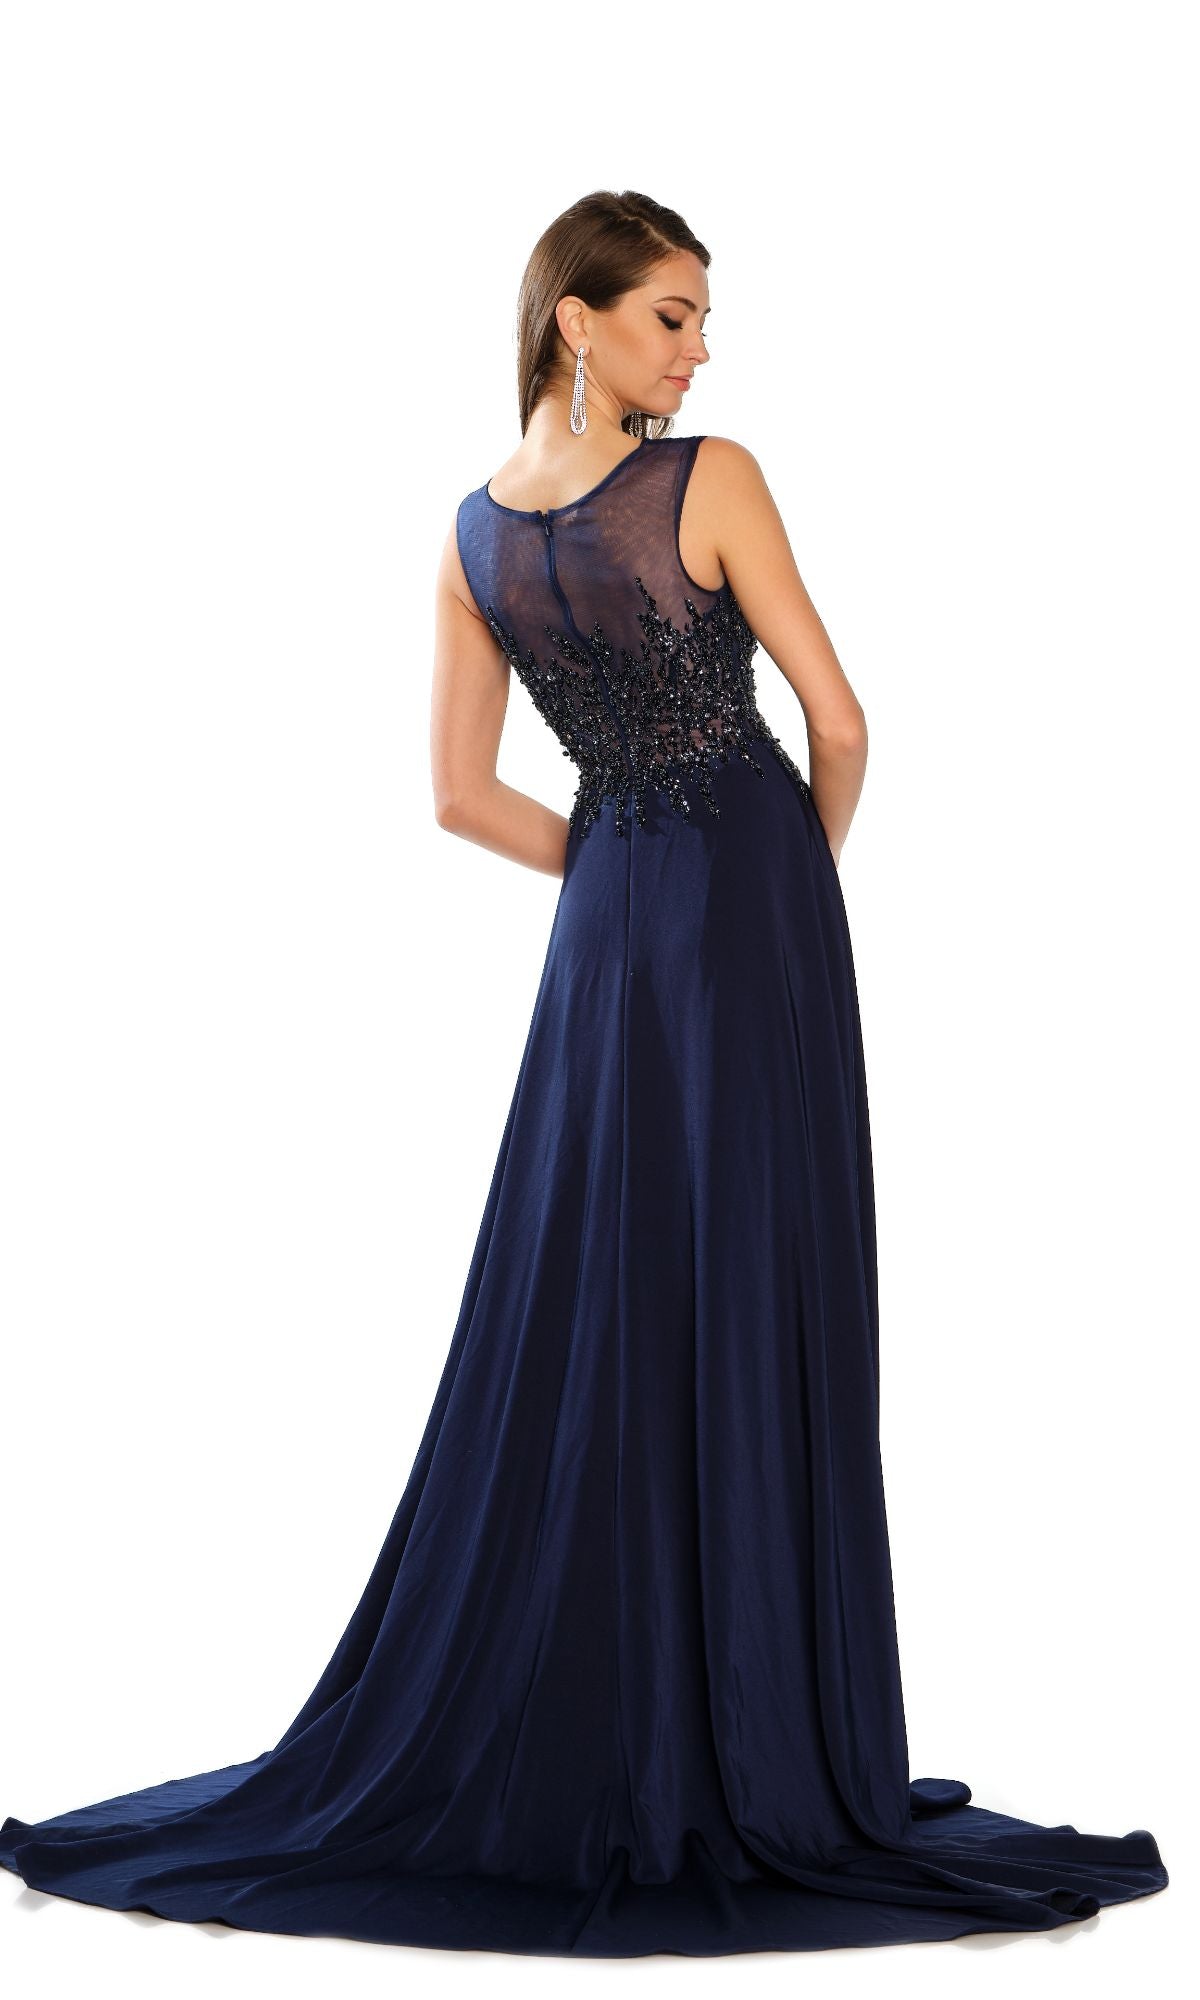 Long Formal Dress 11139 by Dave and Johnny